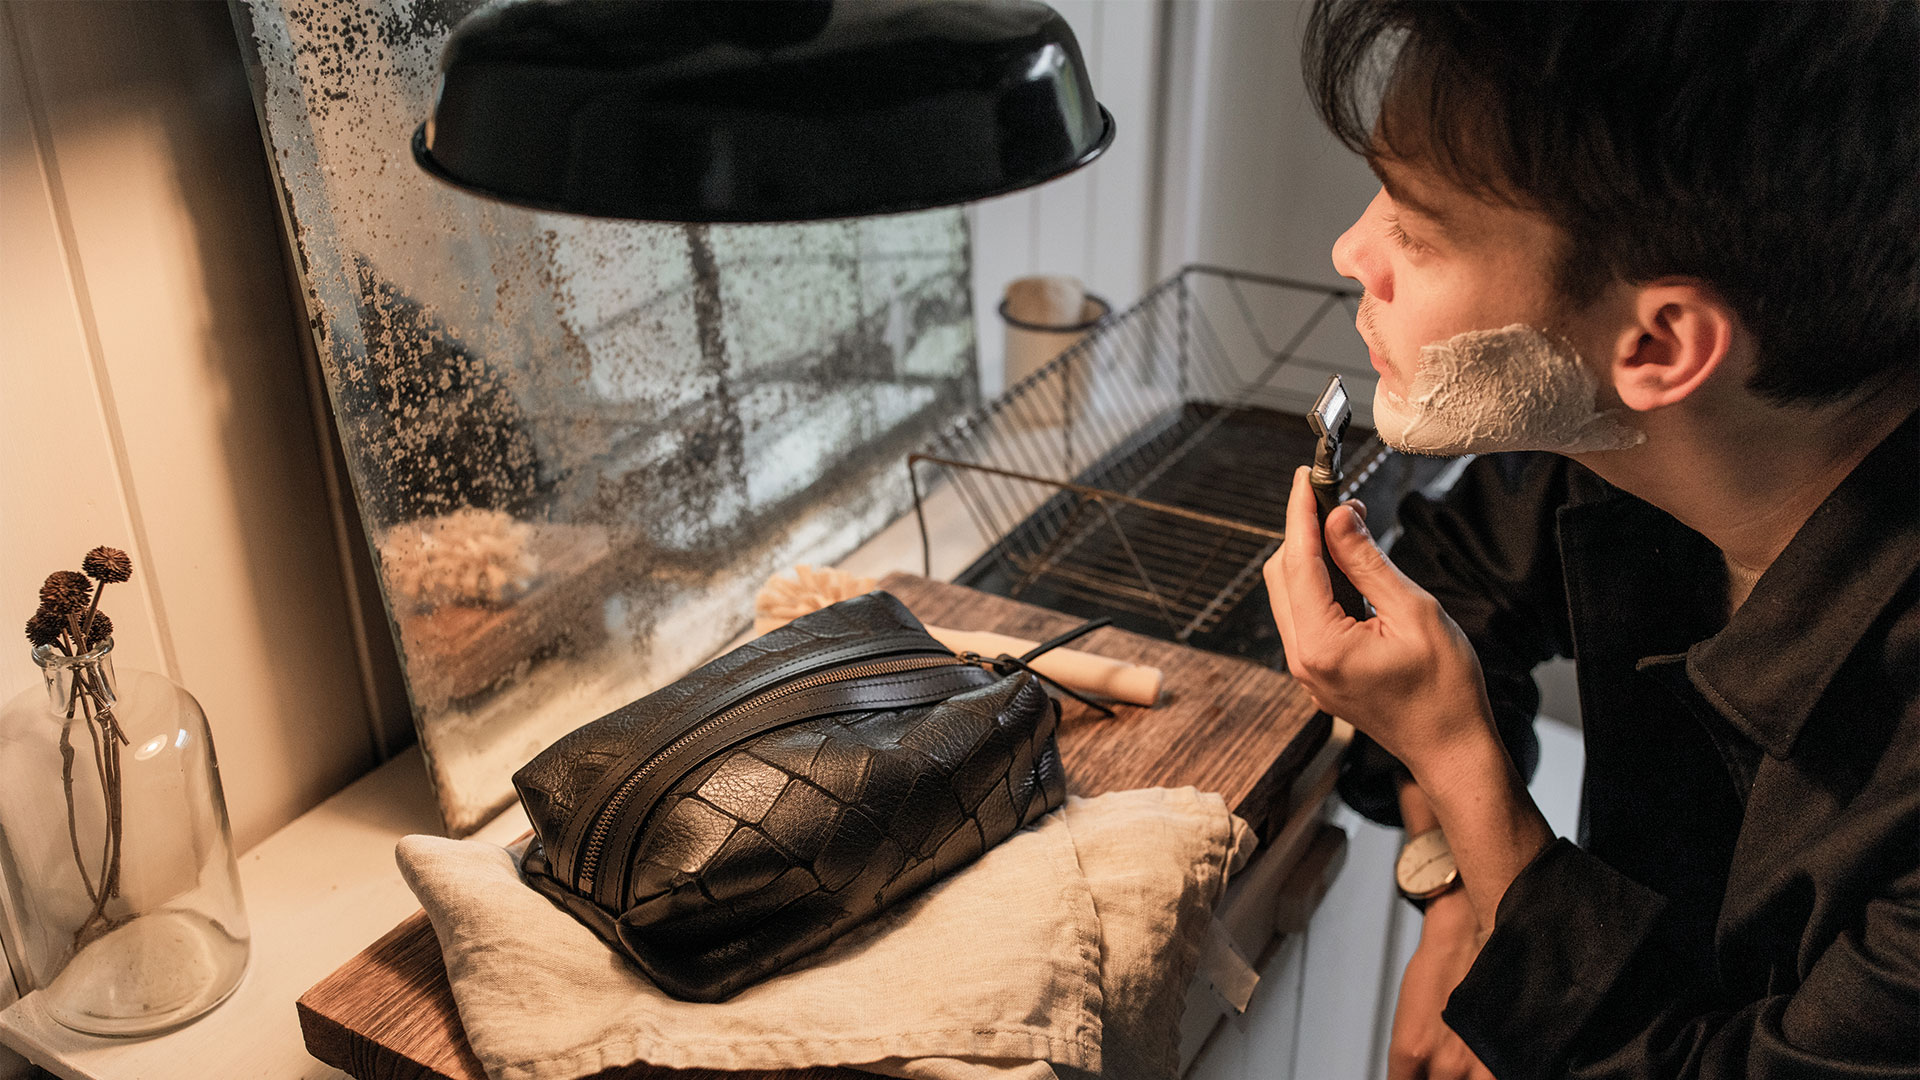 A man shaves in front of a mirror, and on the sink is a leather toiletry bag